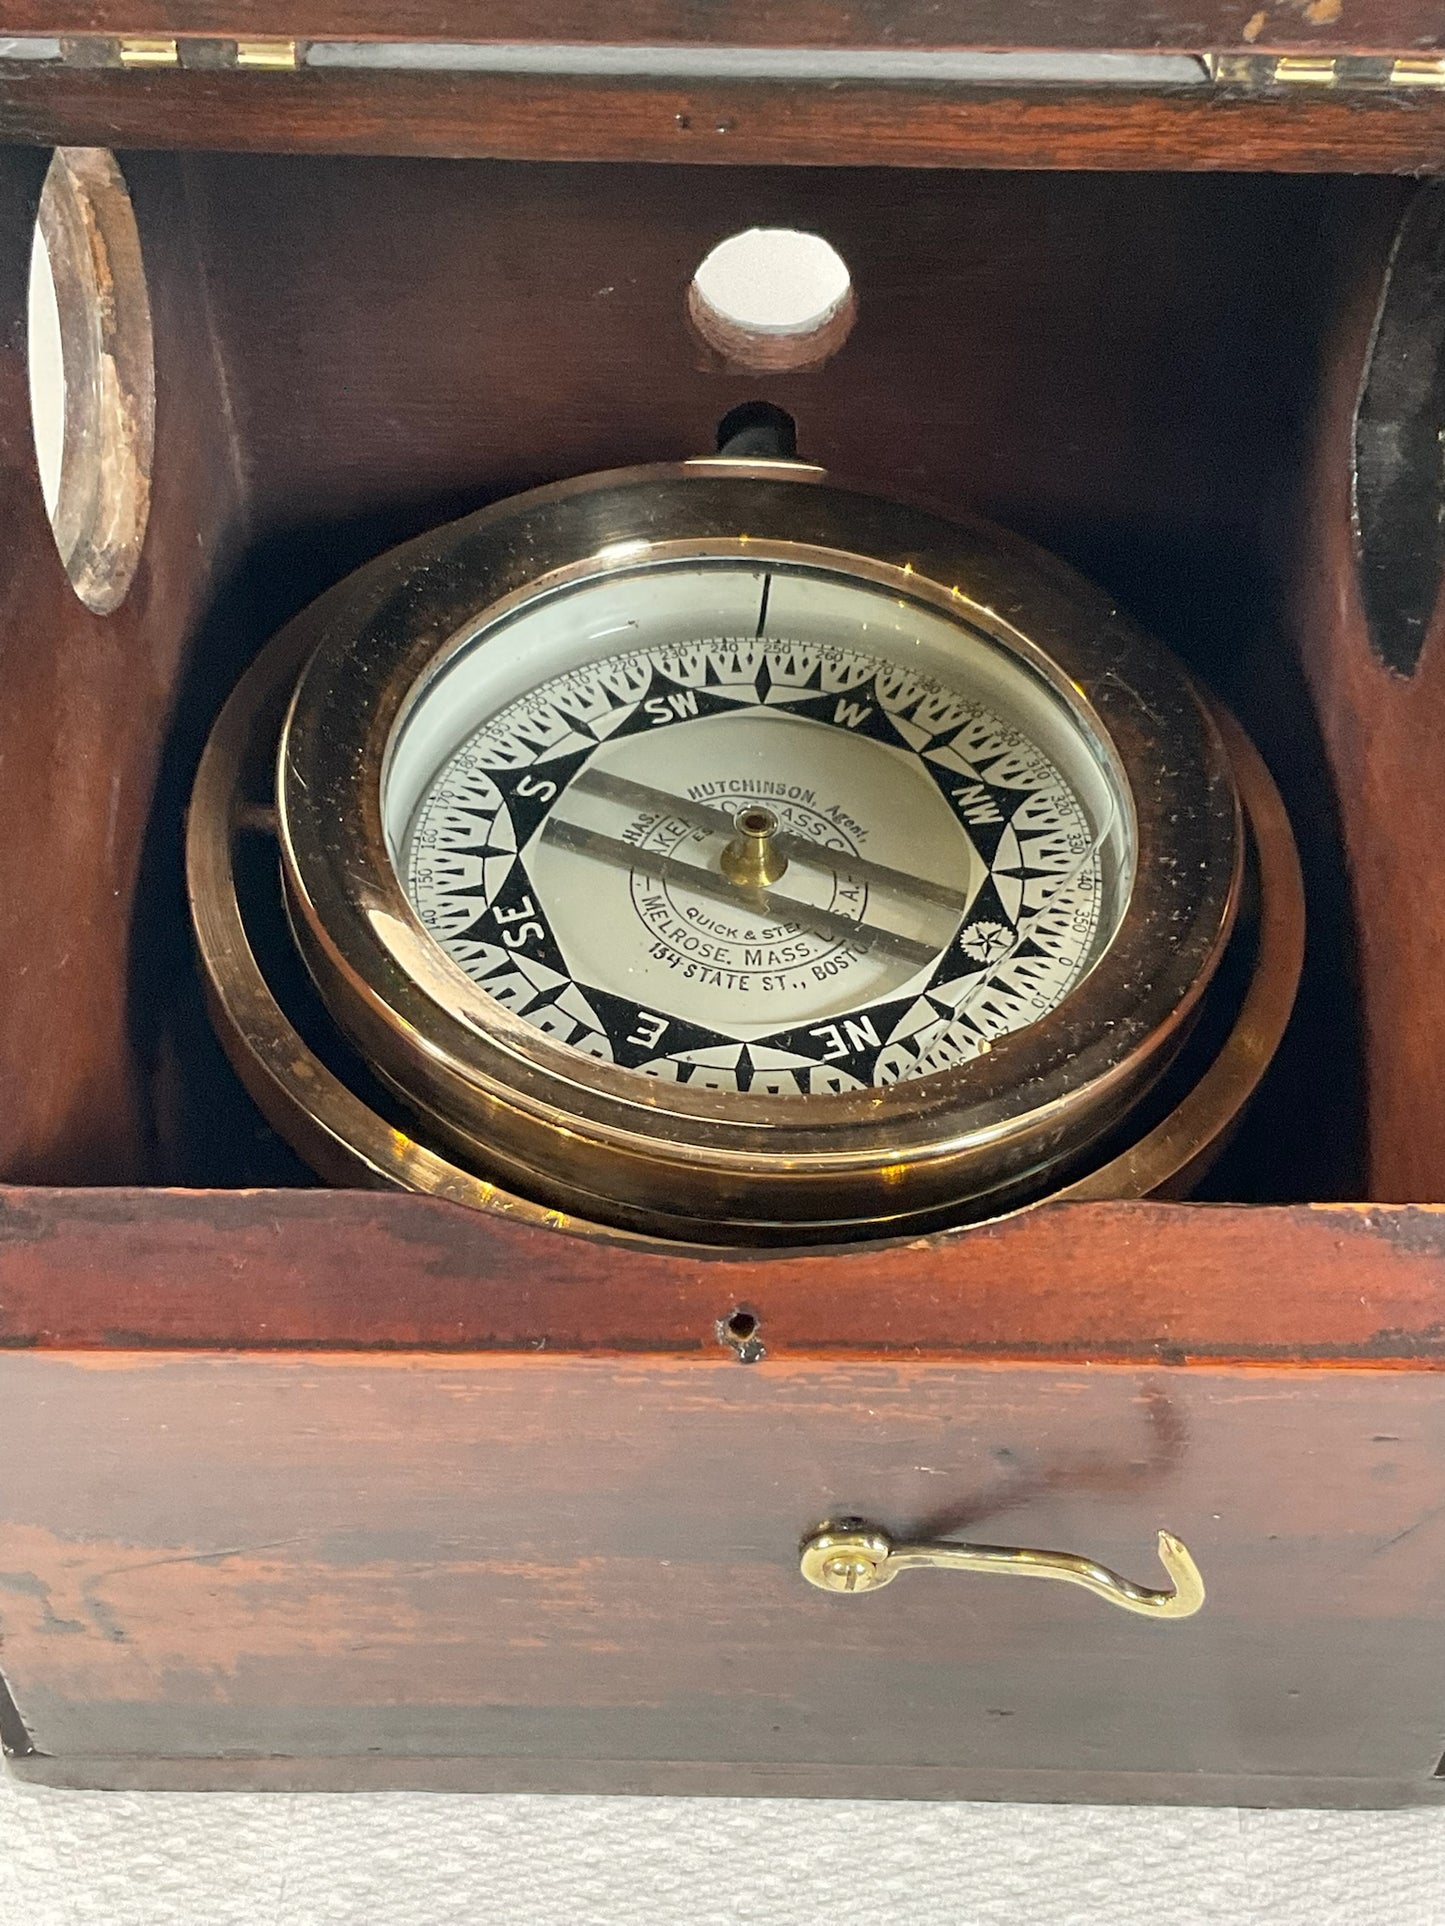 Boat Binnacle Compass from the Nineteenth Century